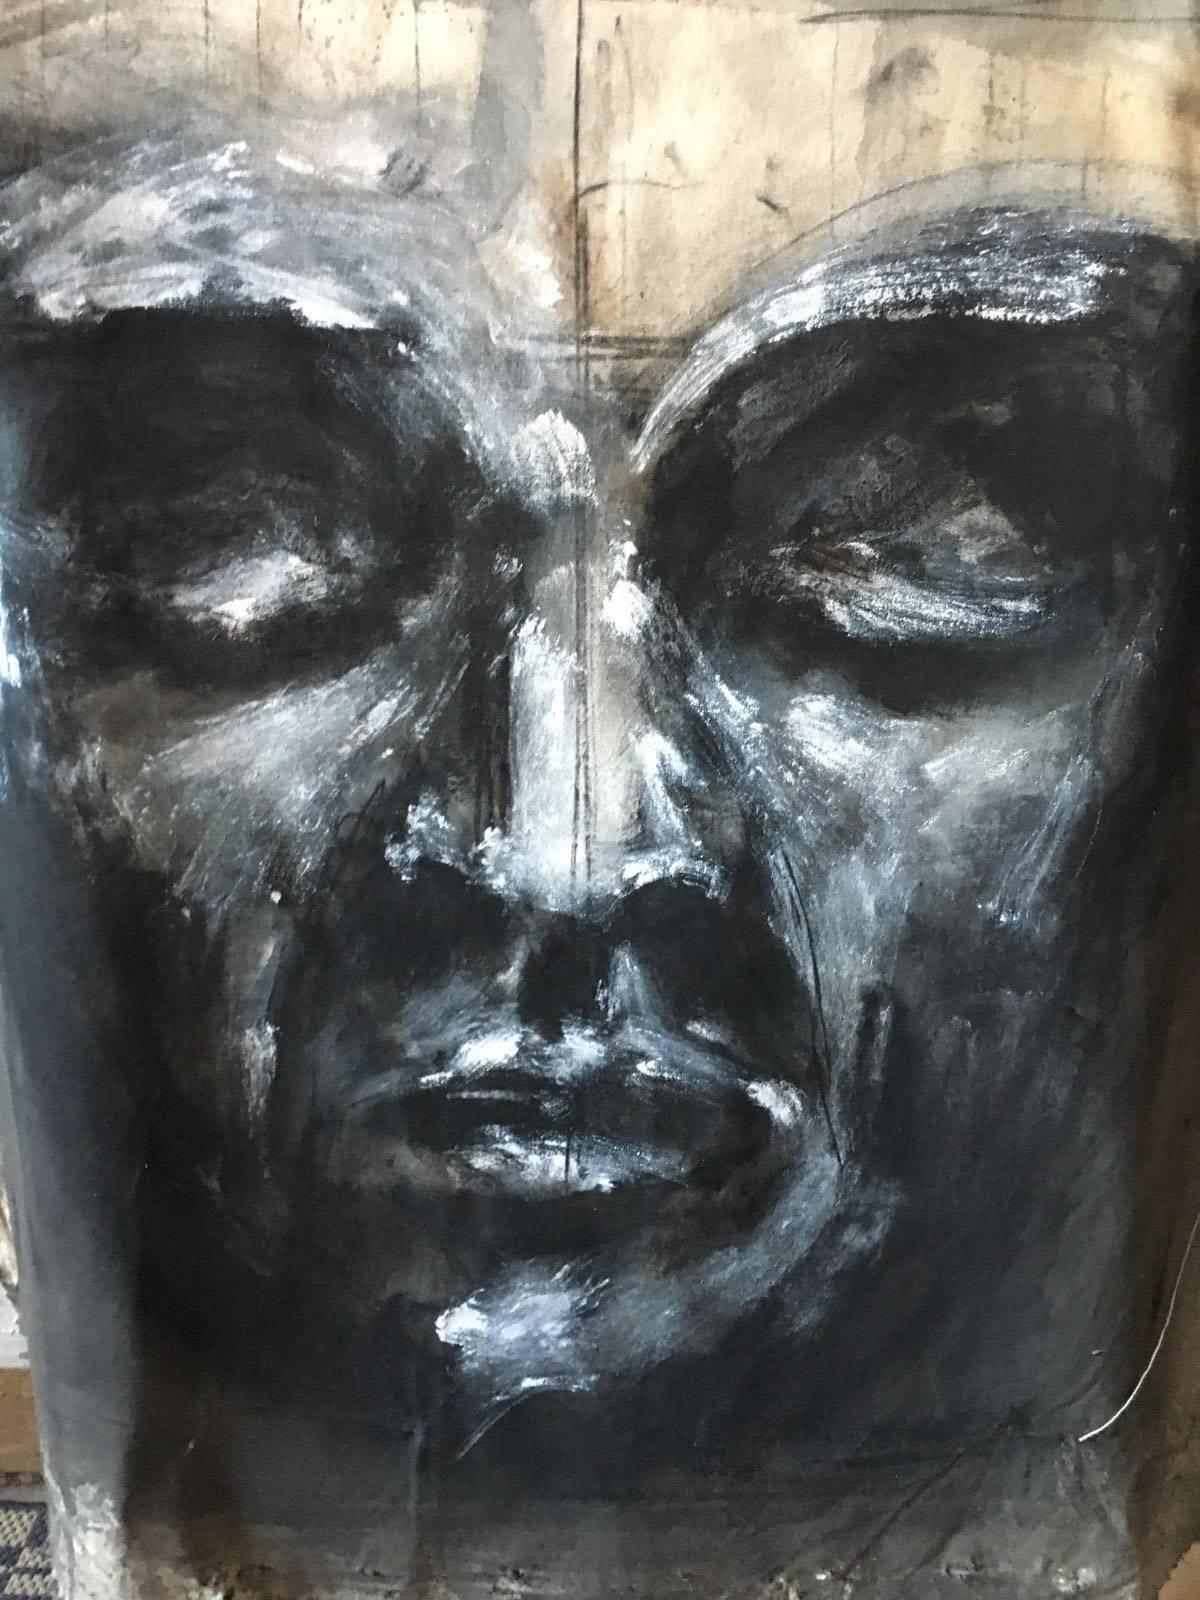 Meditation is a work from the series Incarnation in which Marc Prat investigates masks and the light in the masks. over the years the masks have become faces and are looking for serenity. 
The work is made on canvas using acrylic and charcoal. The